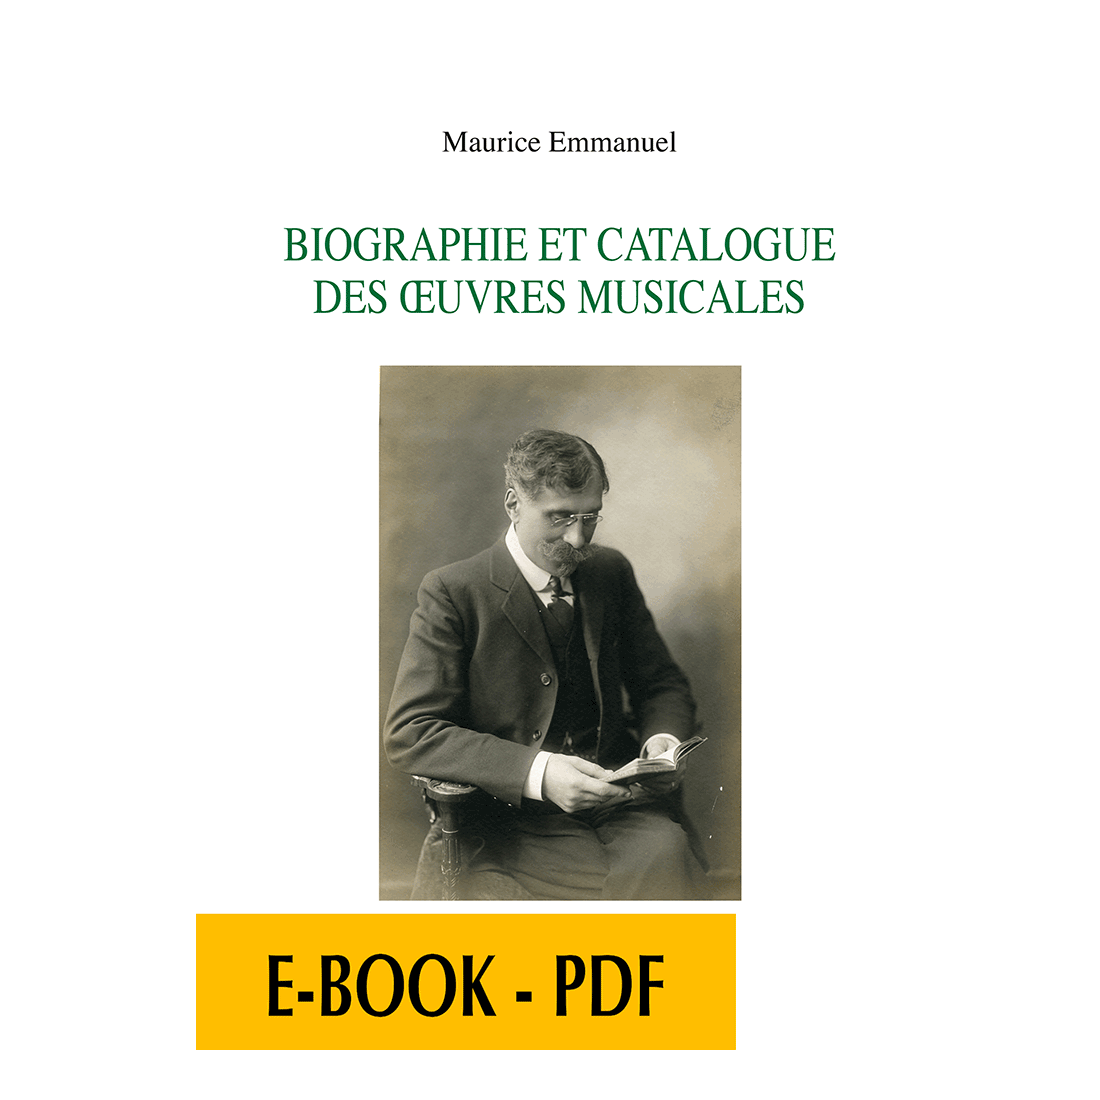 Biography and catalog of musical works - E-book PDF